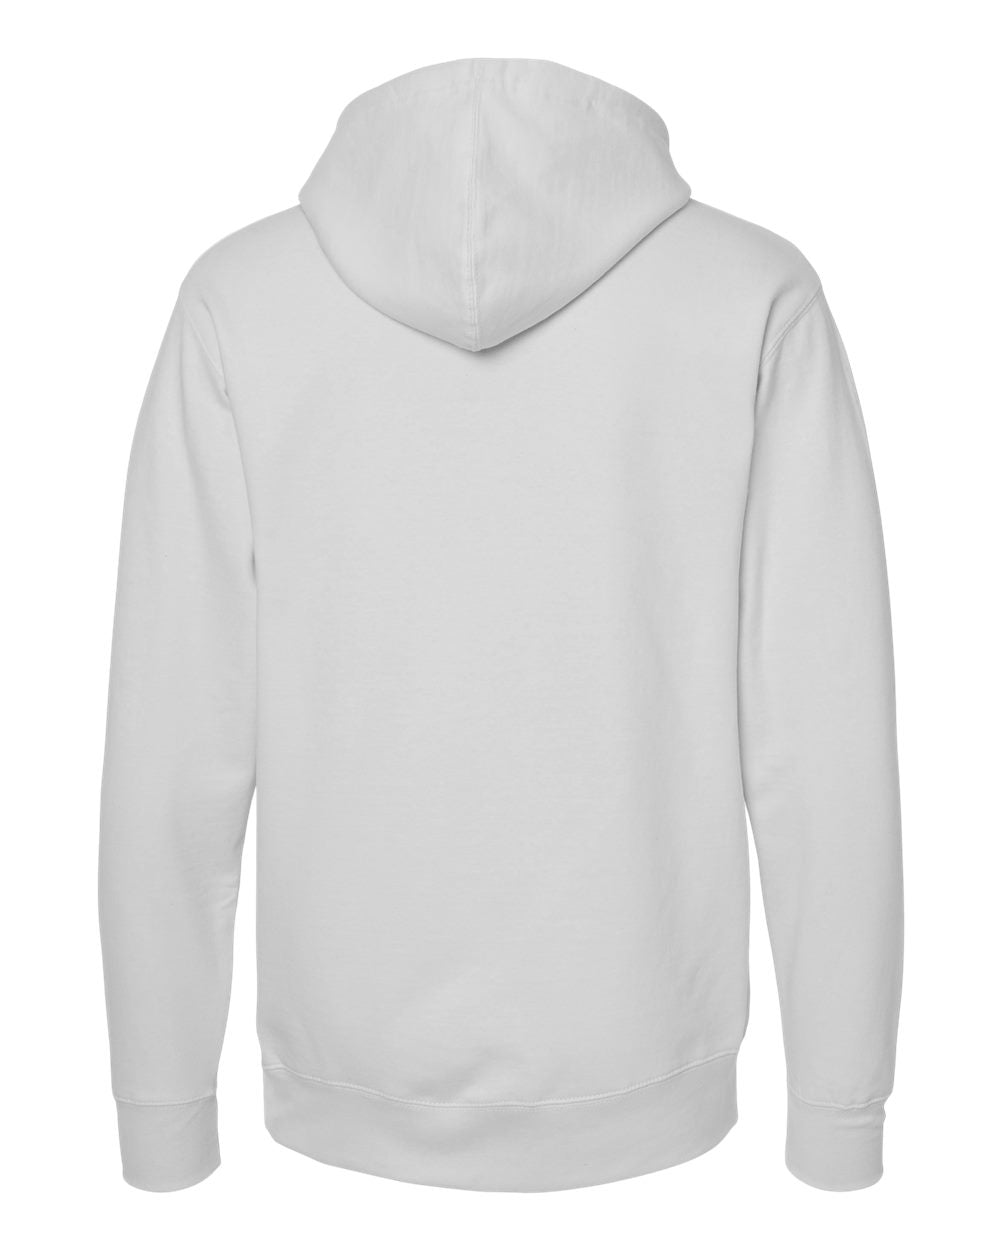 Independent Trading Co. - Midweight Hooded Sweatshirt - SS4500